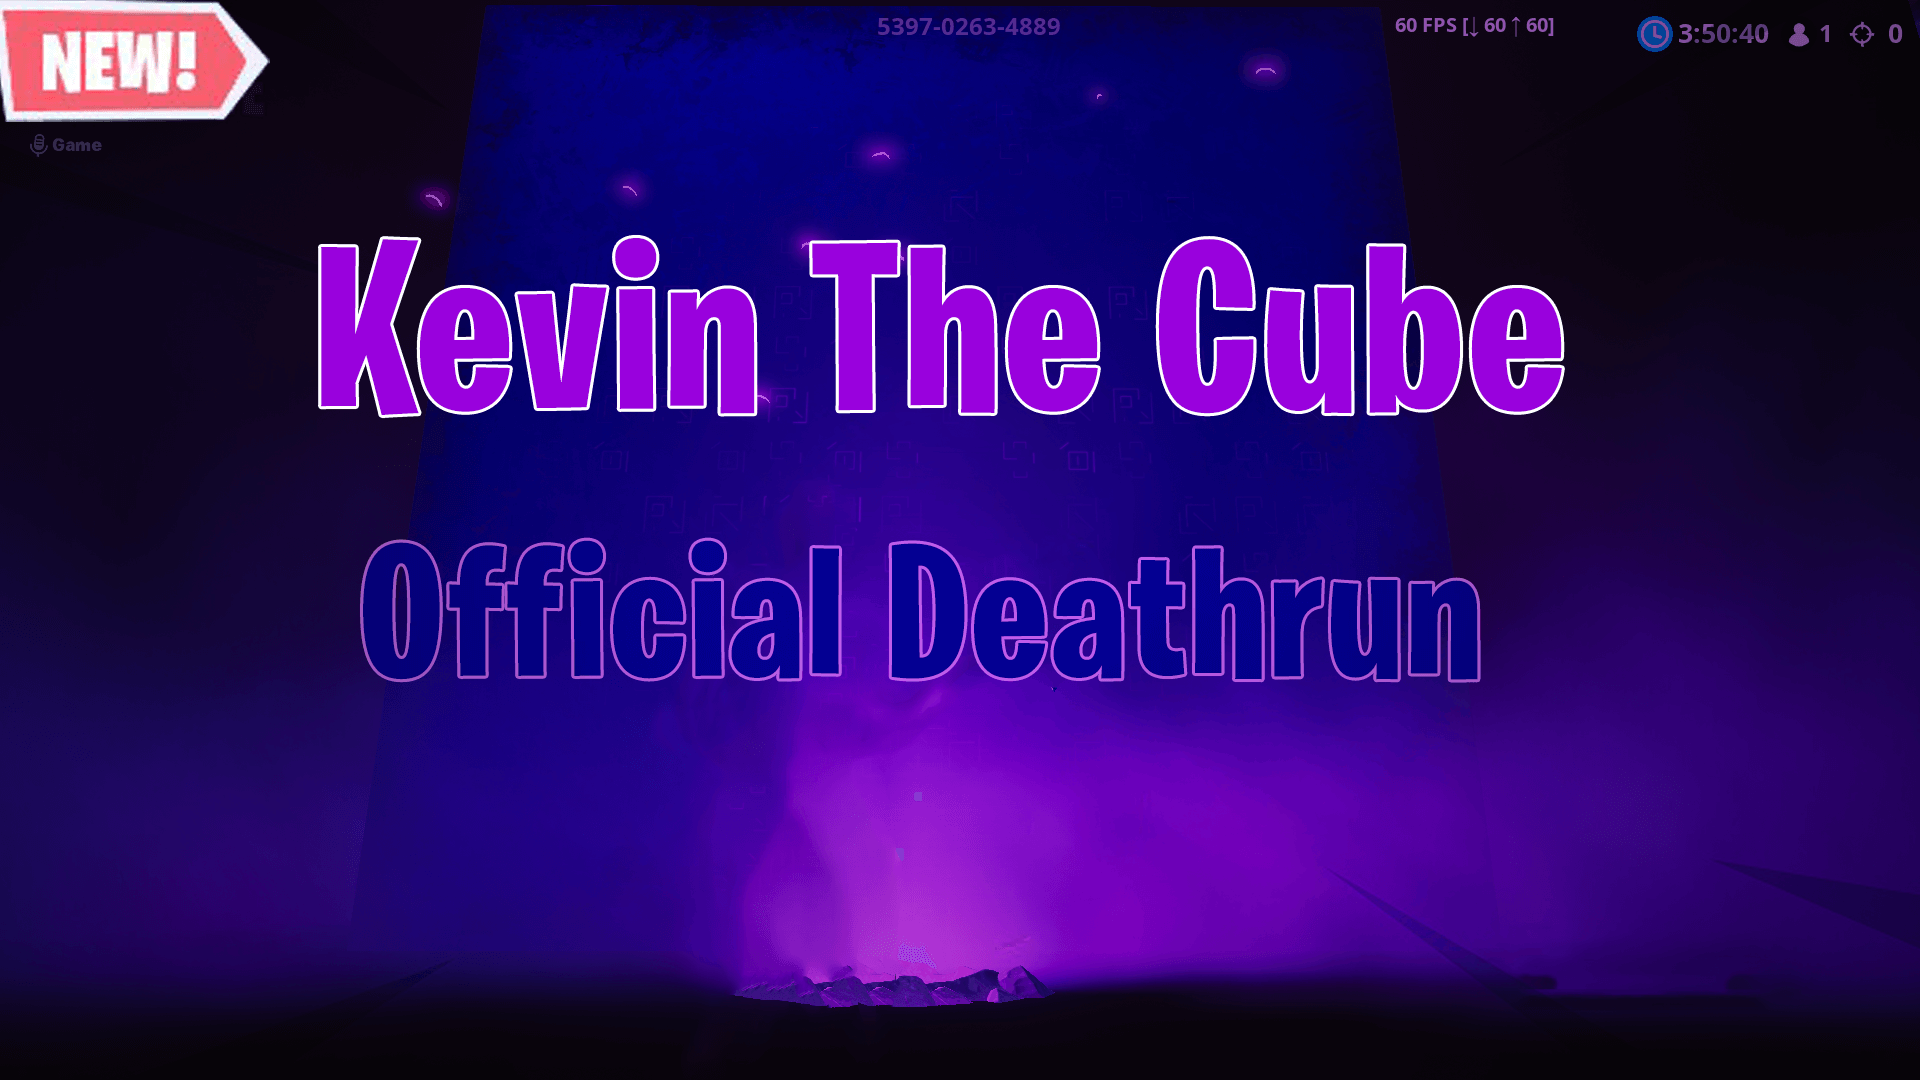 KEVIN THE CUBE OFFICIAL DEATHRUN